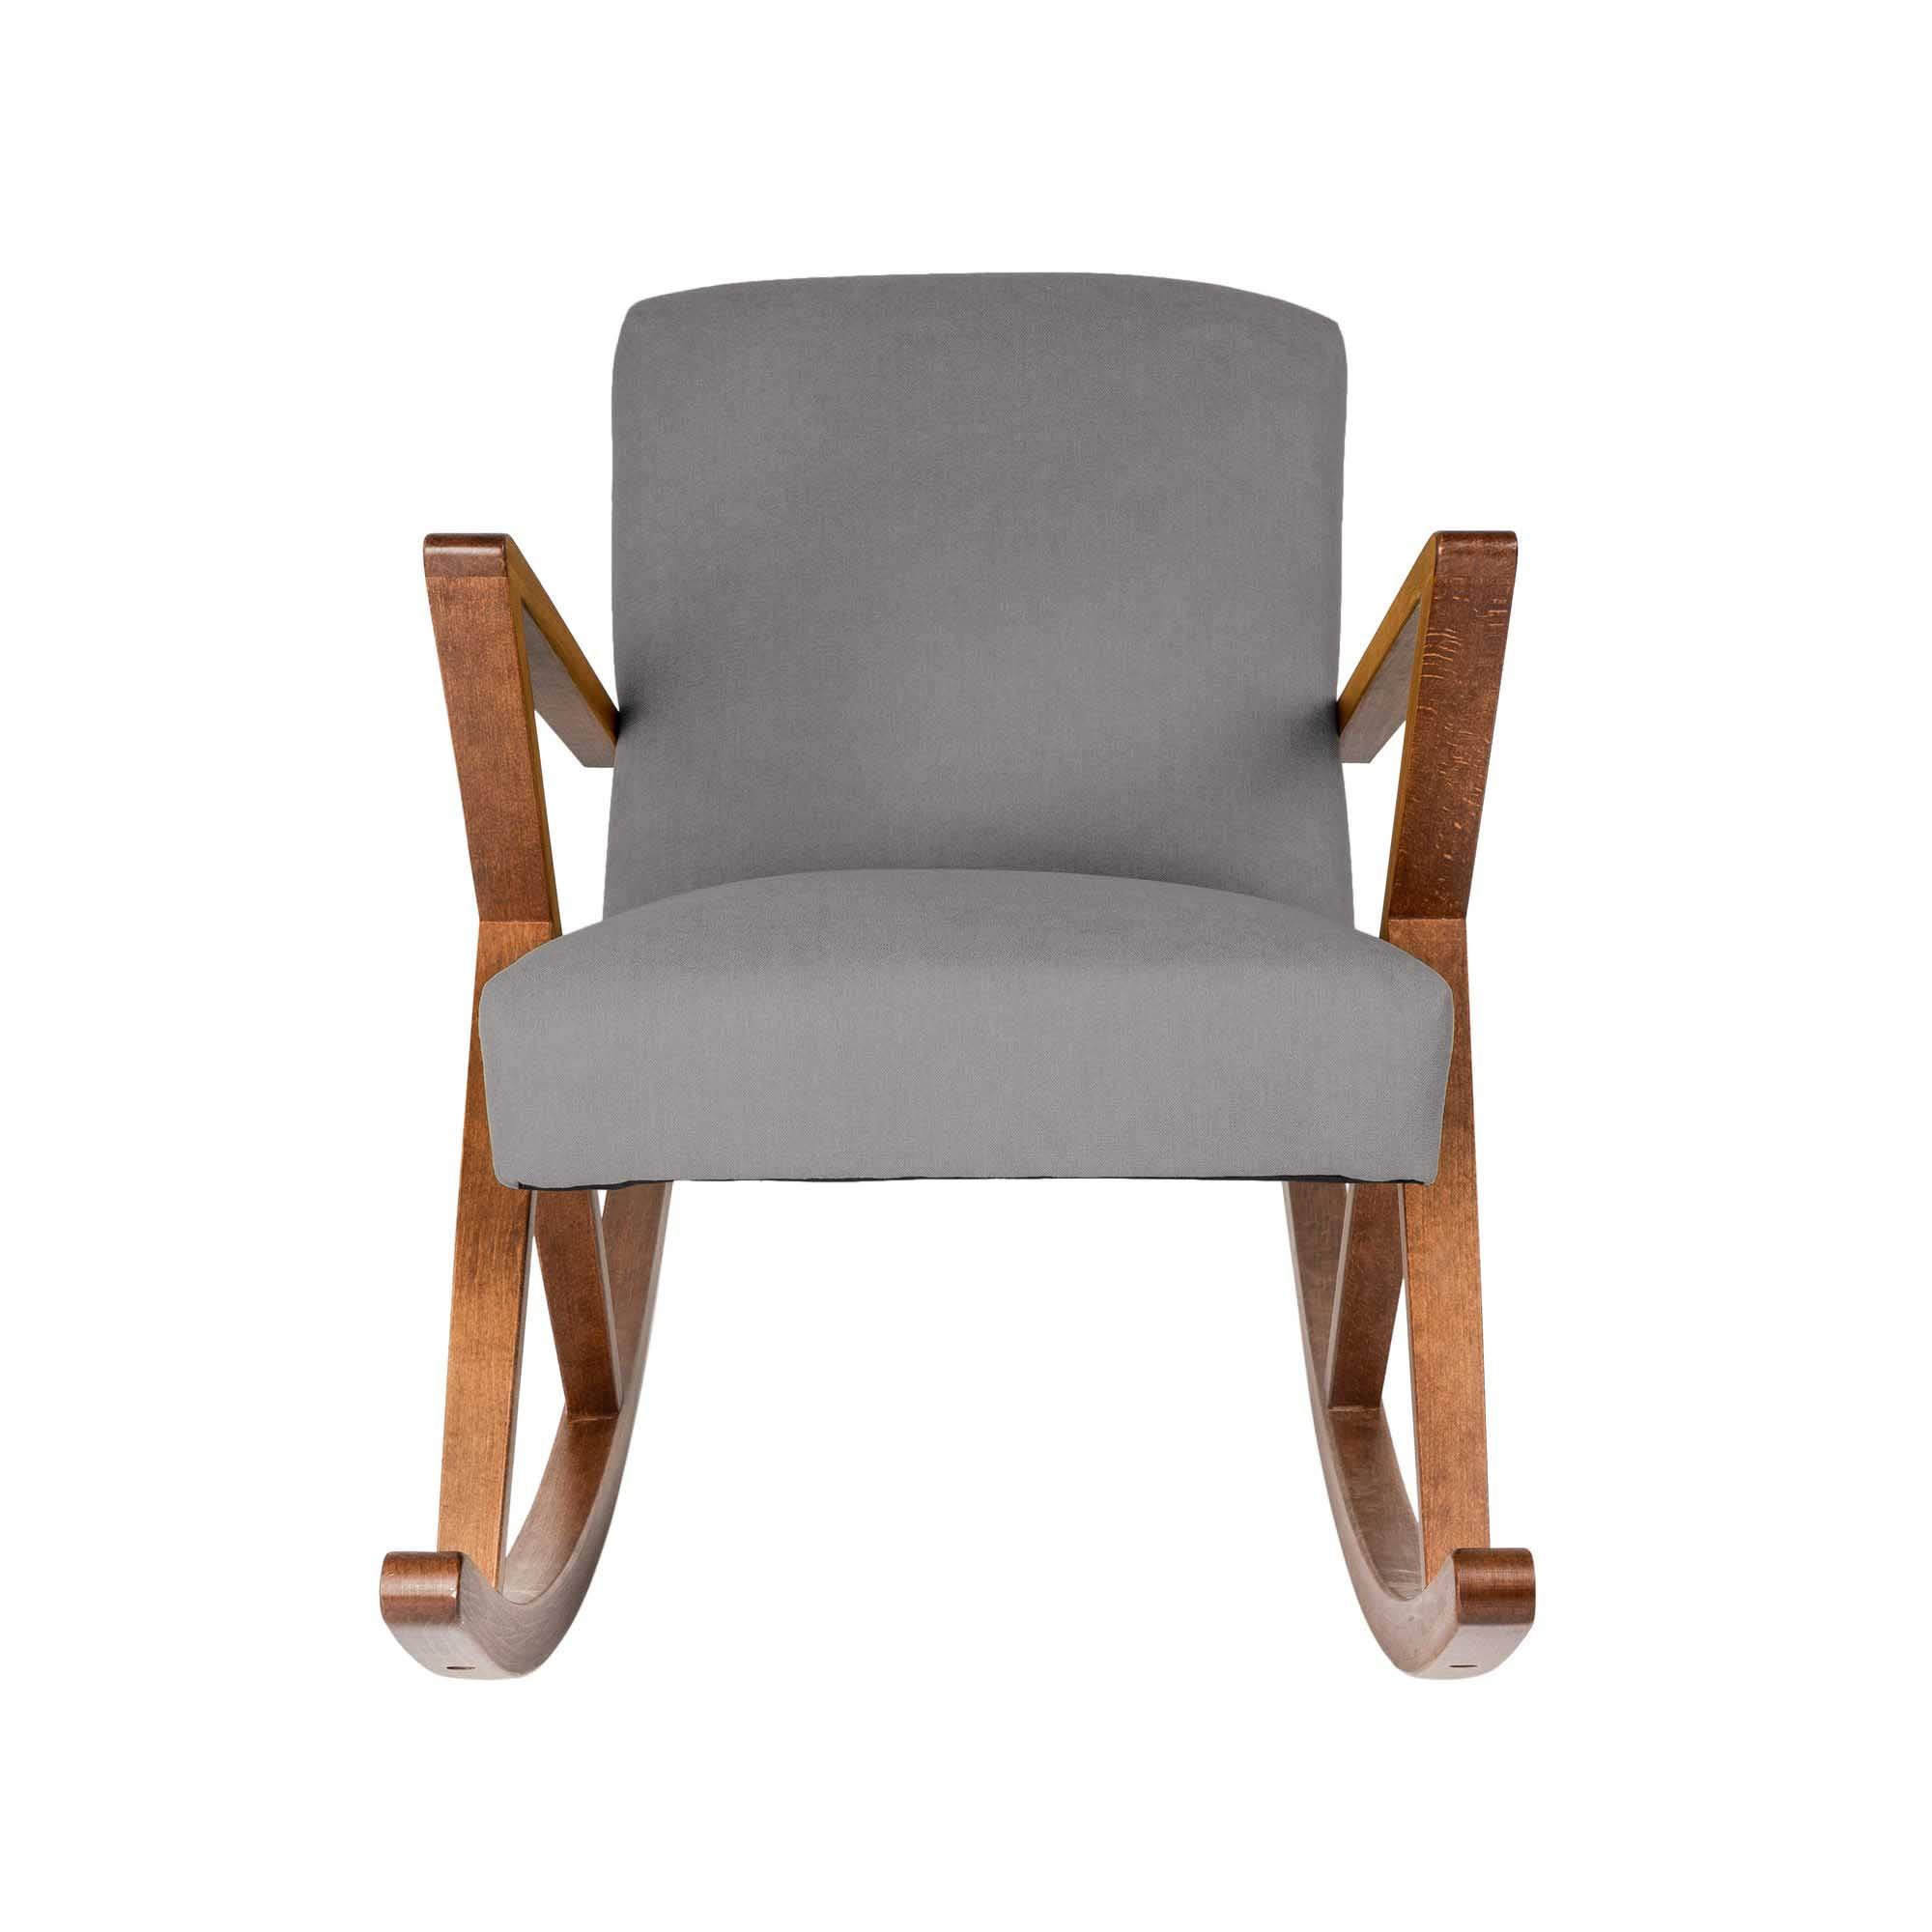  Rocking Chair, Beech Wood Frame, Walnut Colour grey fabric, front view